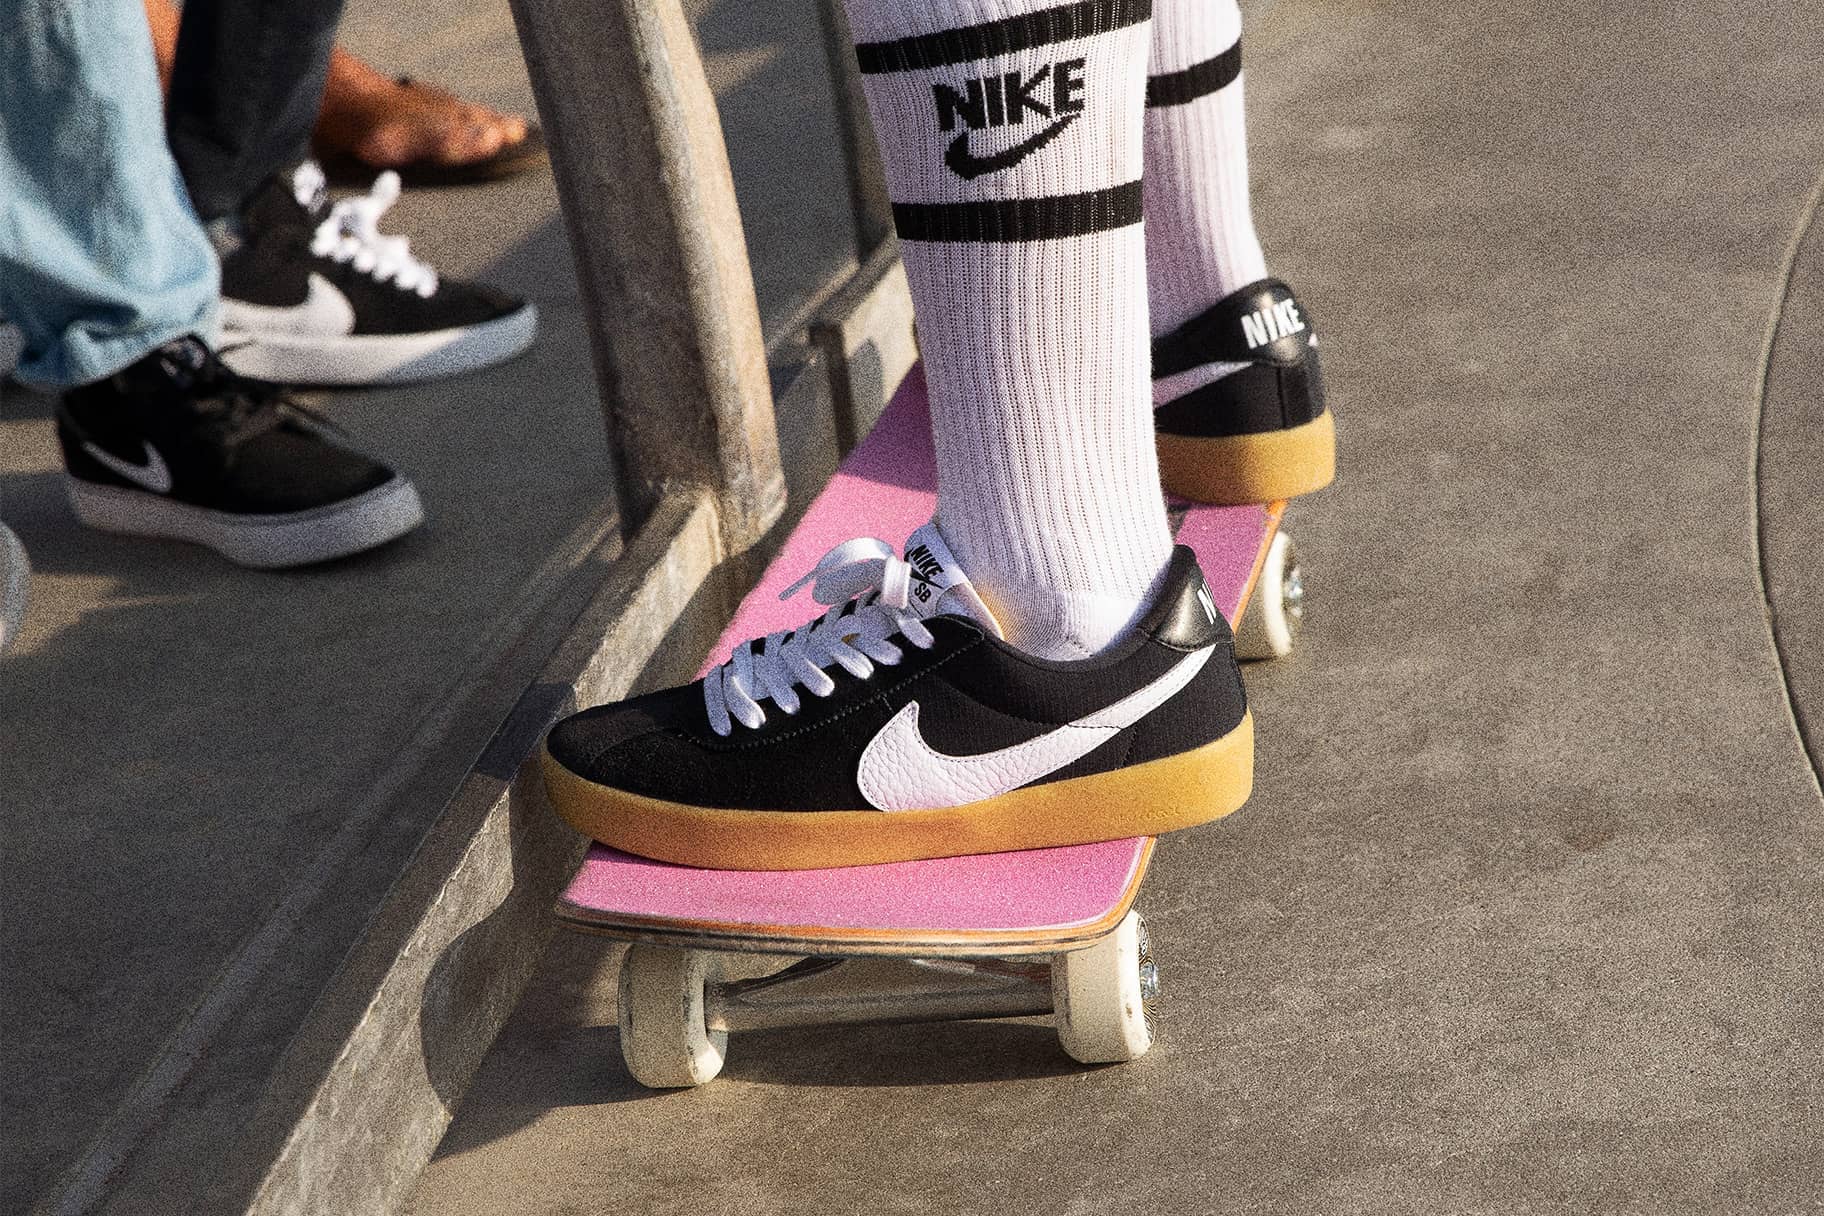 The Best Nike Shoes for Skateboarding. Nike IL